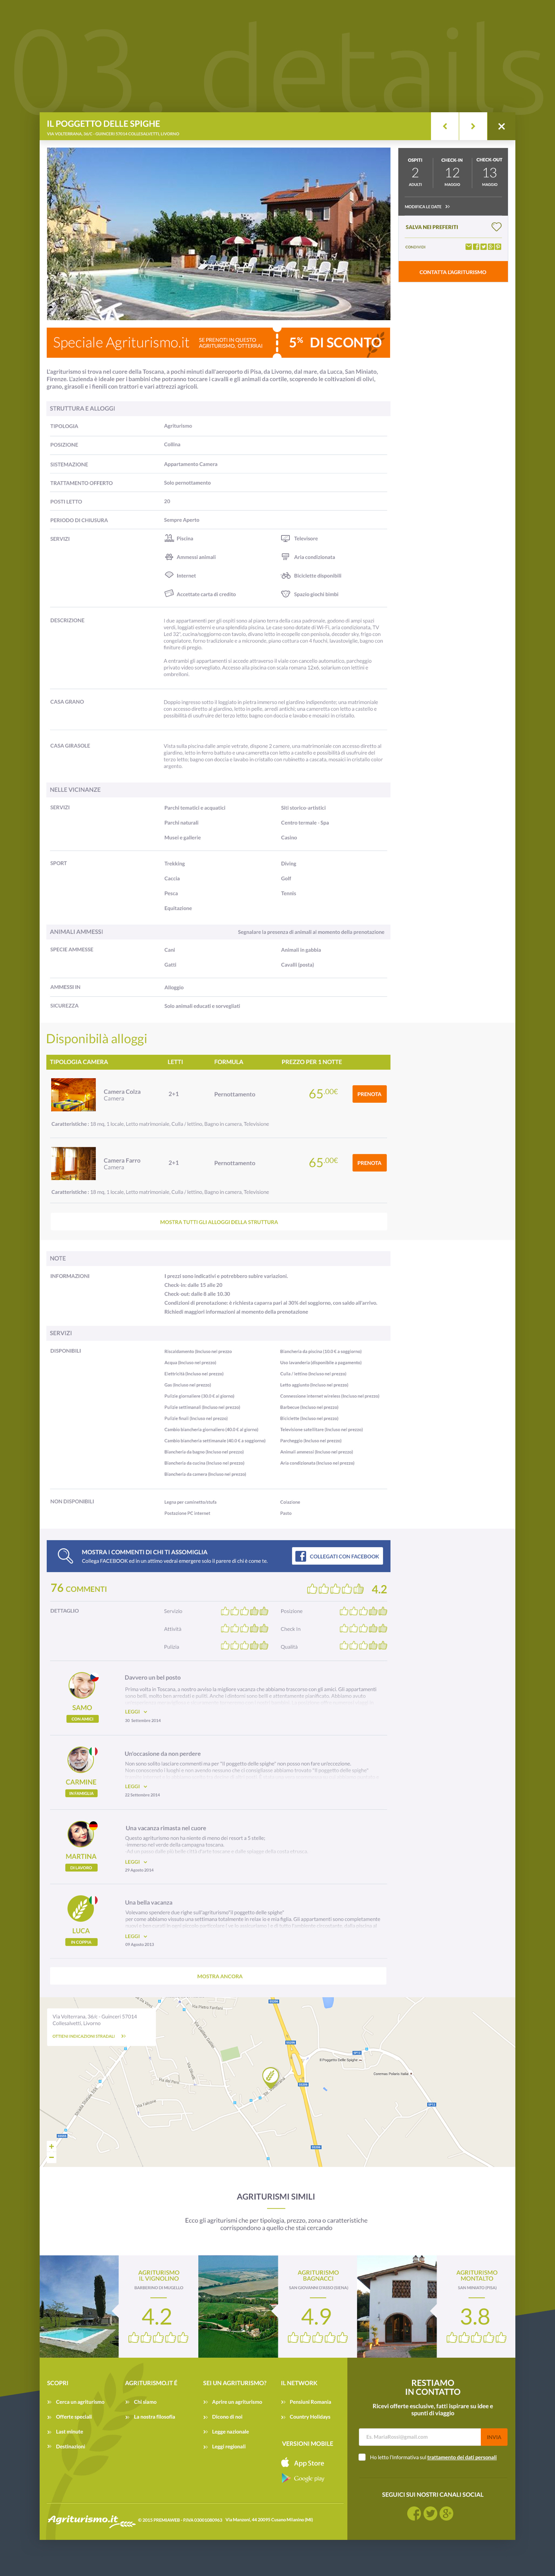 Booking redesign Web Design  ux/ui user experience straypeople concept